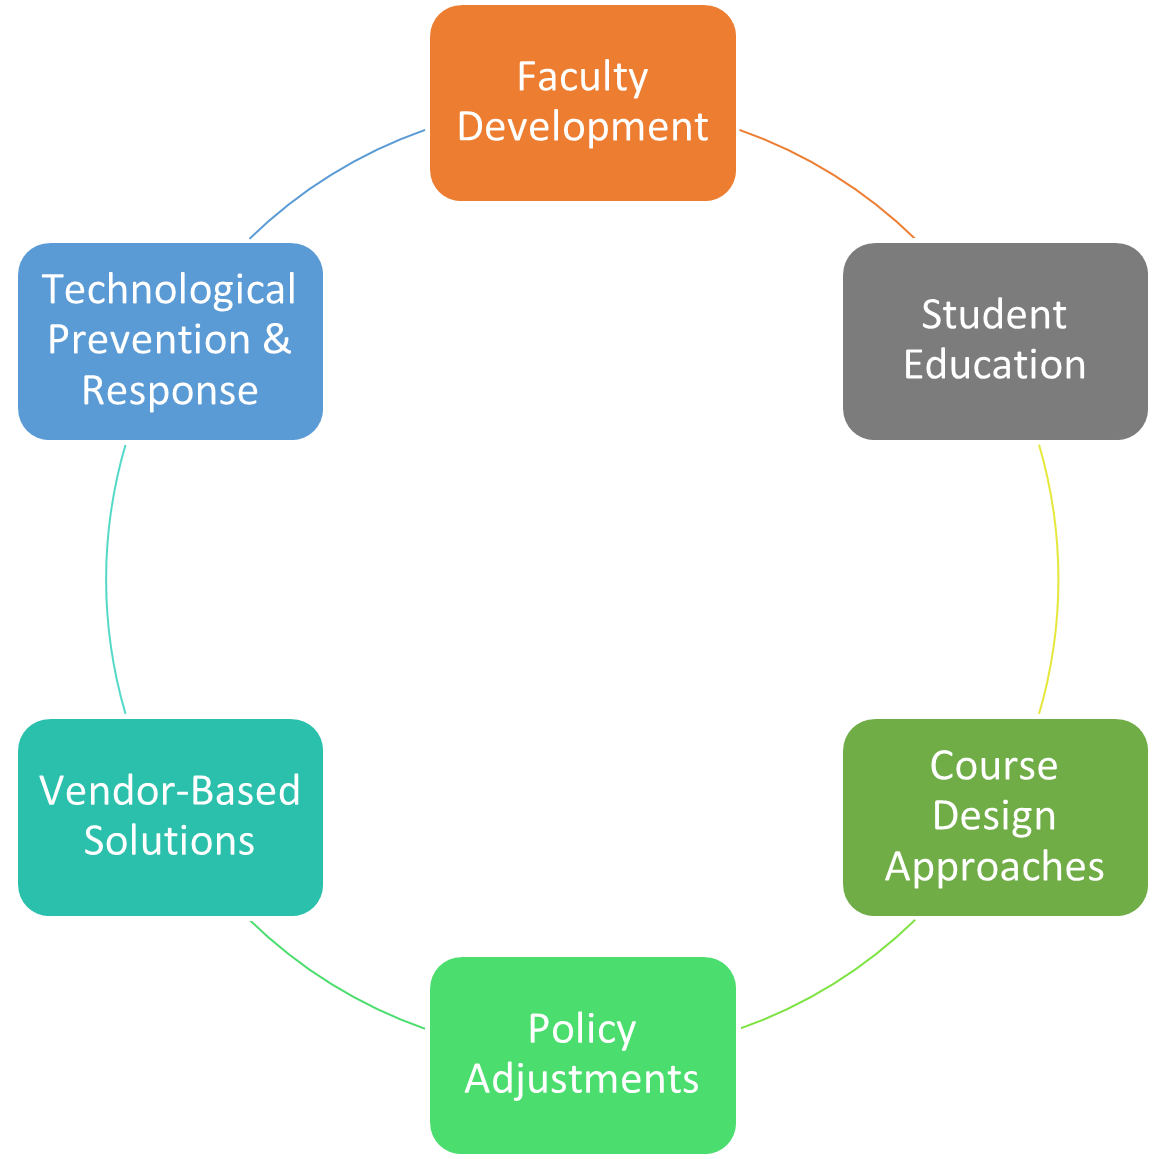 Faculty Development
Student Education
Course Design Approaches
Policy Adjustments
Vendor-Based Solutions
Technological Prevention & Response